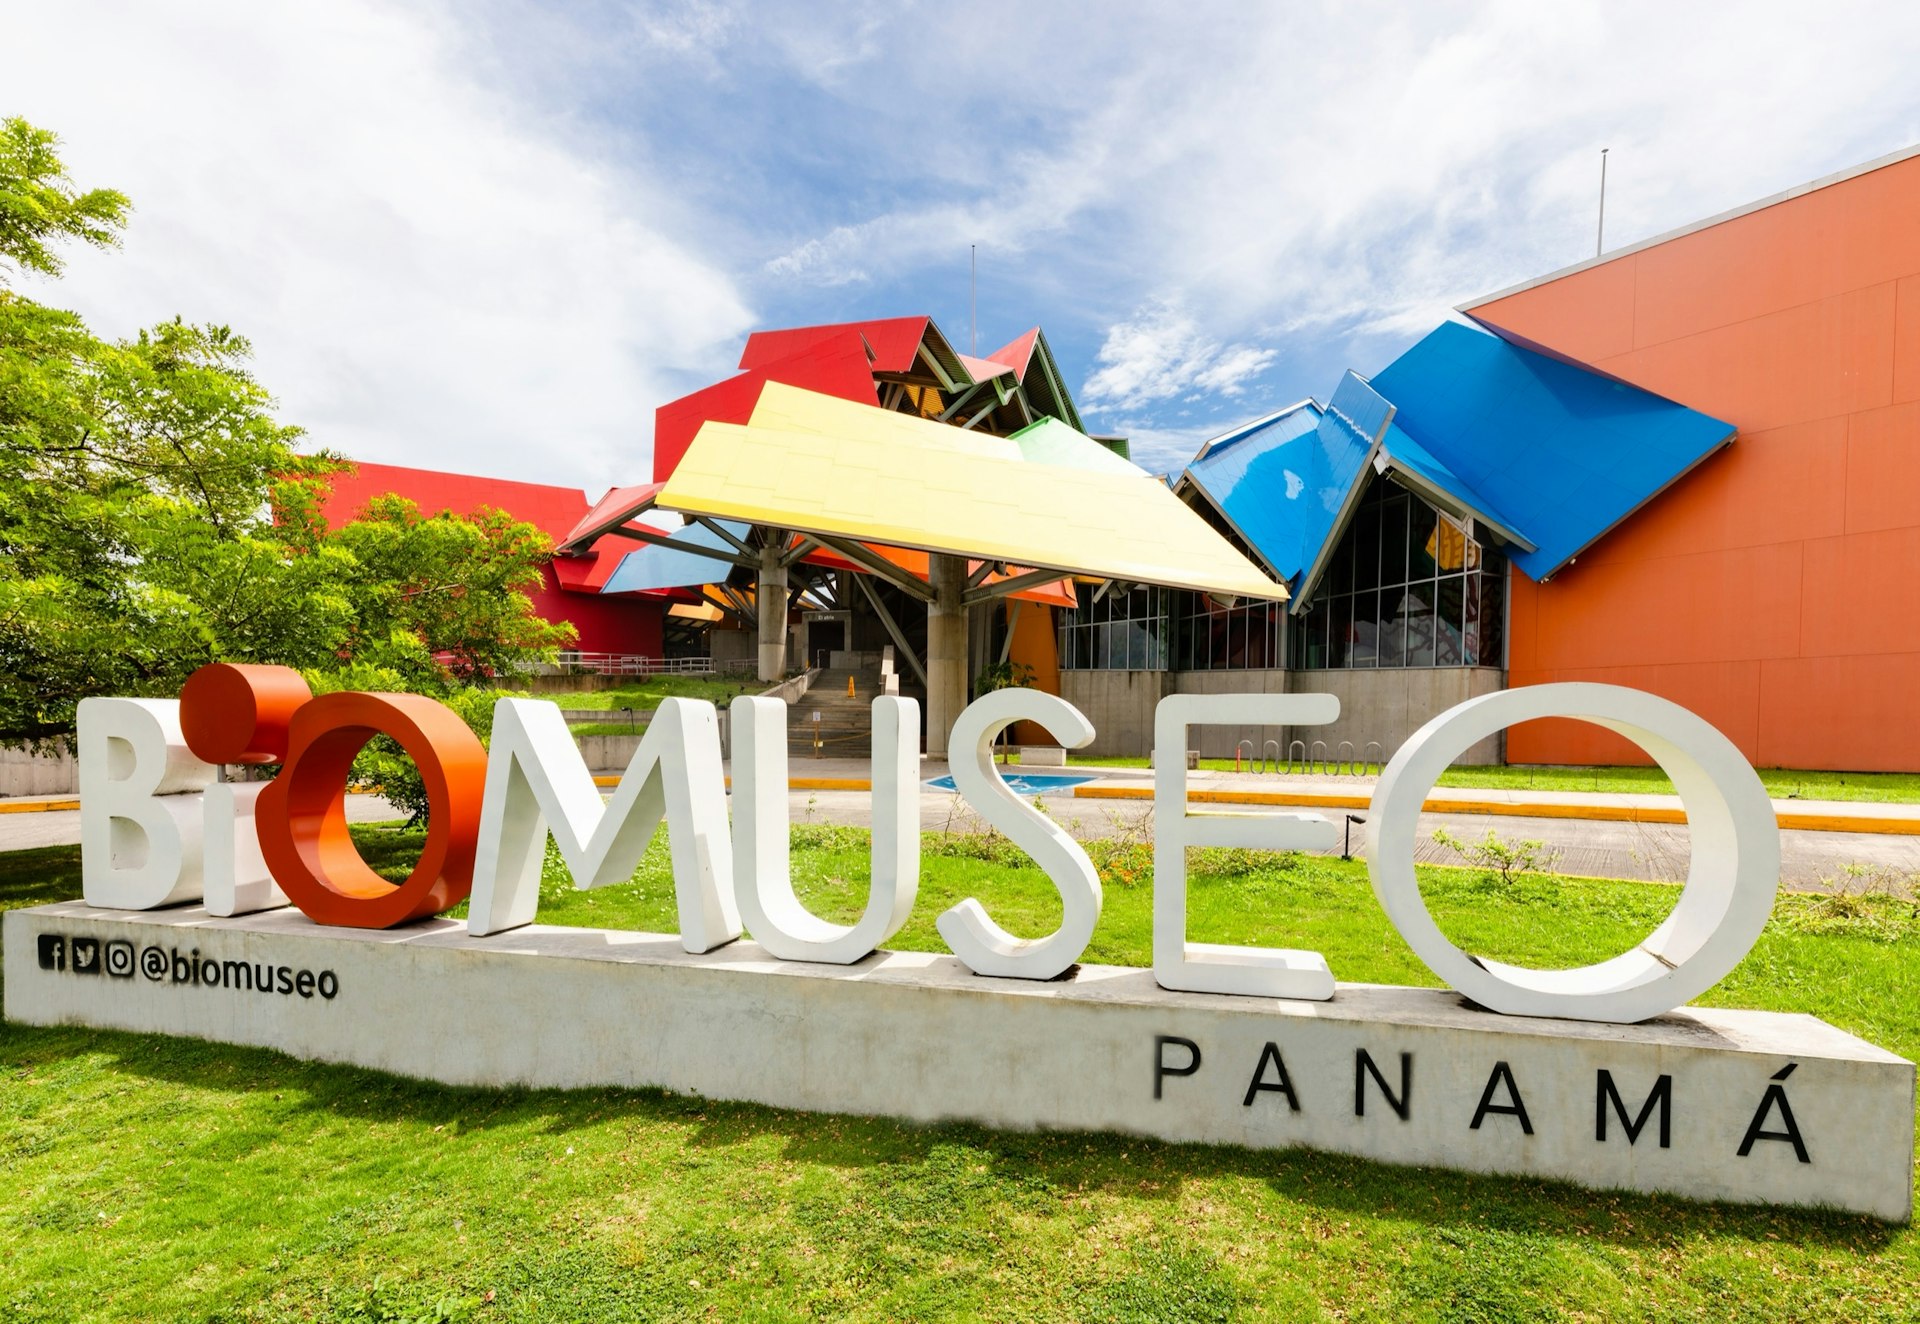 Exterior shot of the colorful BioMuseo in Panama. There is a BioMuseo sign on the grass